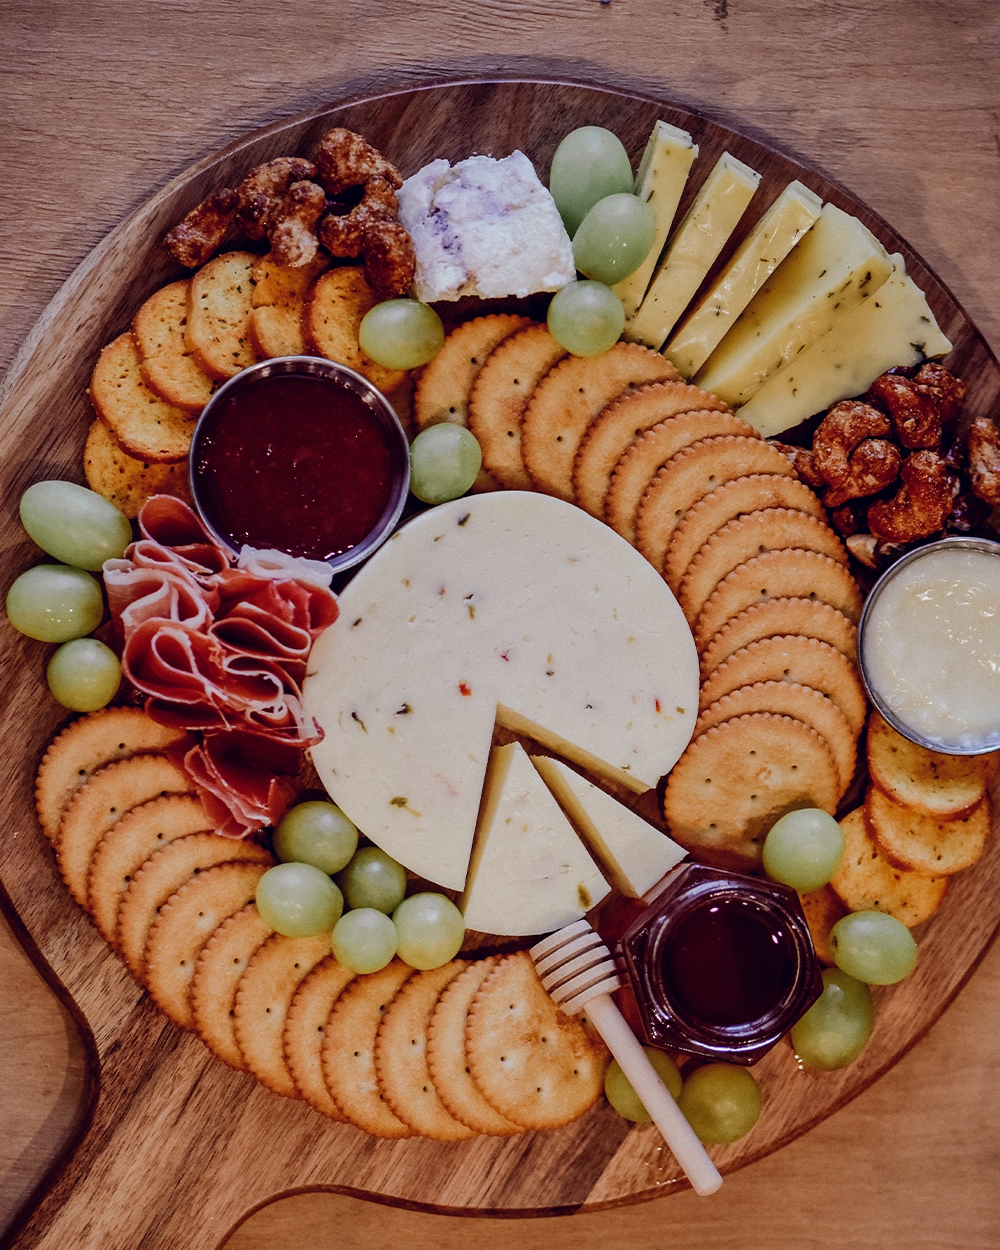 ood cheese board with sliced cheese, meat, crackers, nuts, fruit, and sauces.